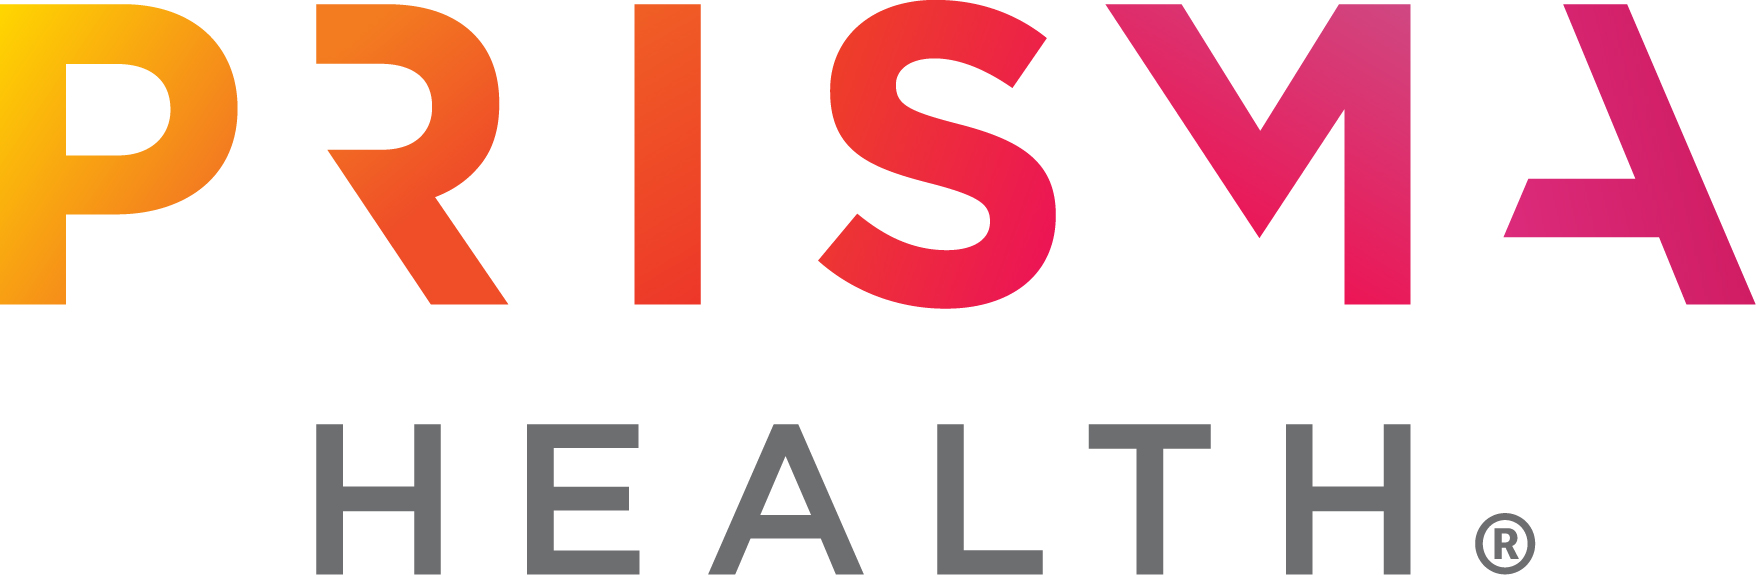 Prisma Health logo.  Prisma is in large letters with gradation from orange to magenta.  Health appears in smaller letters in gray.  